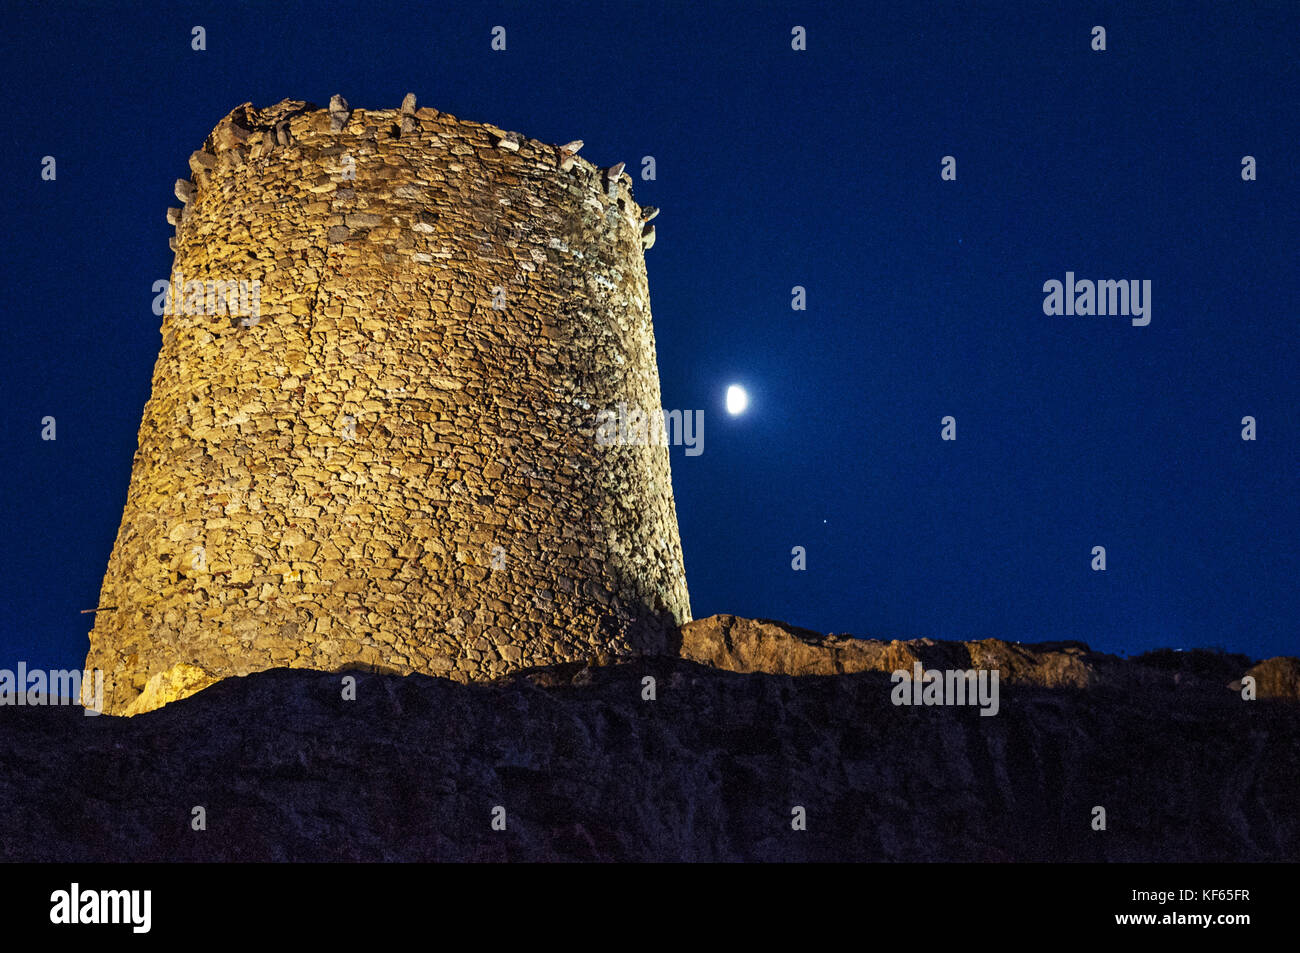 Corsica: moonlight on the Genoese Tower (15th century) on the top of the Ile de la Pietra (Stone Island), rocky promontory of Ile-Rousse (Red Island) Stock Photo